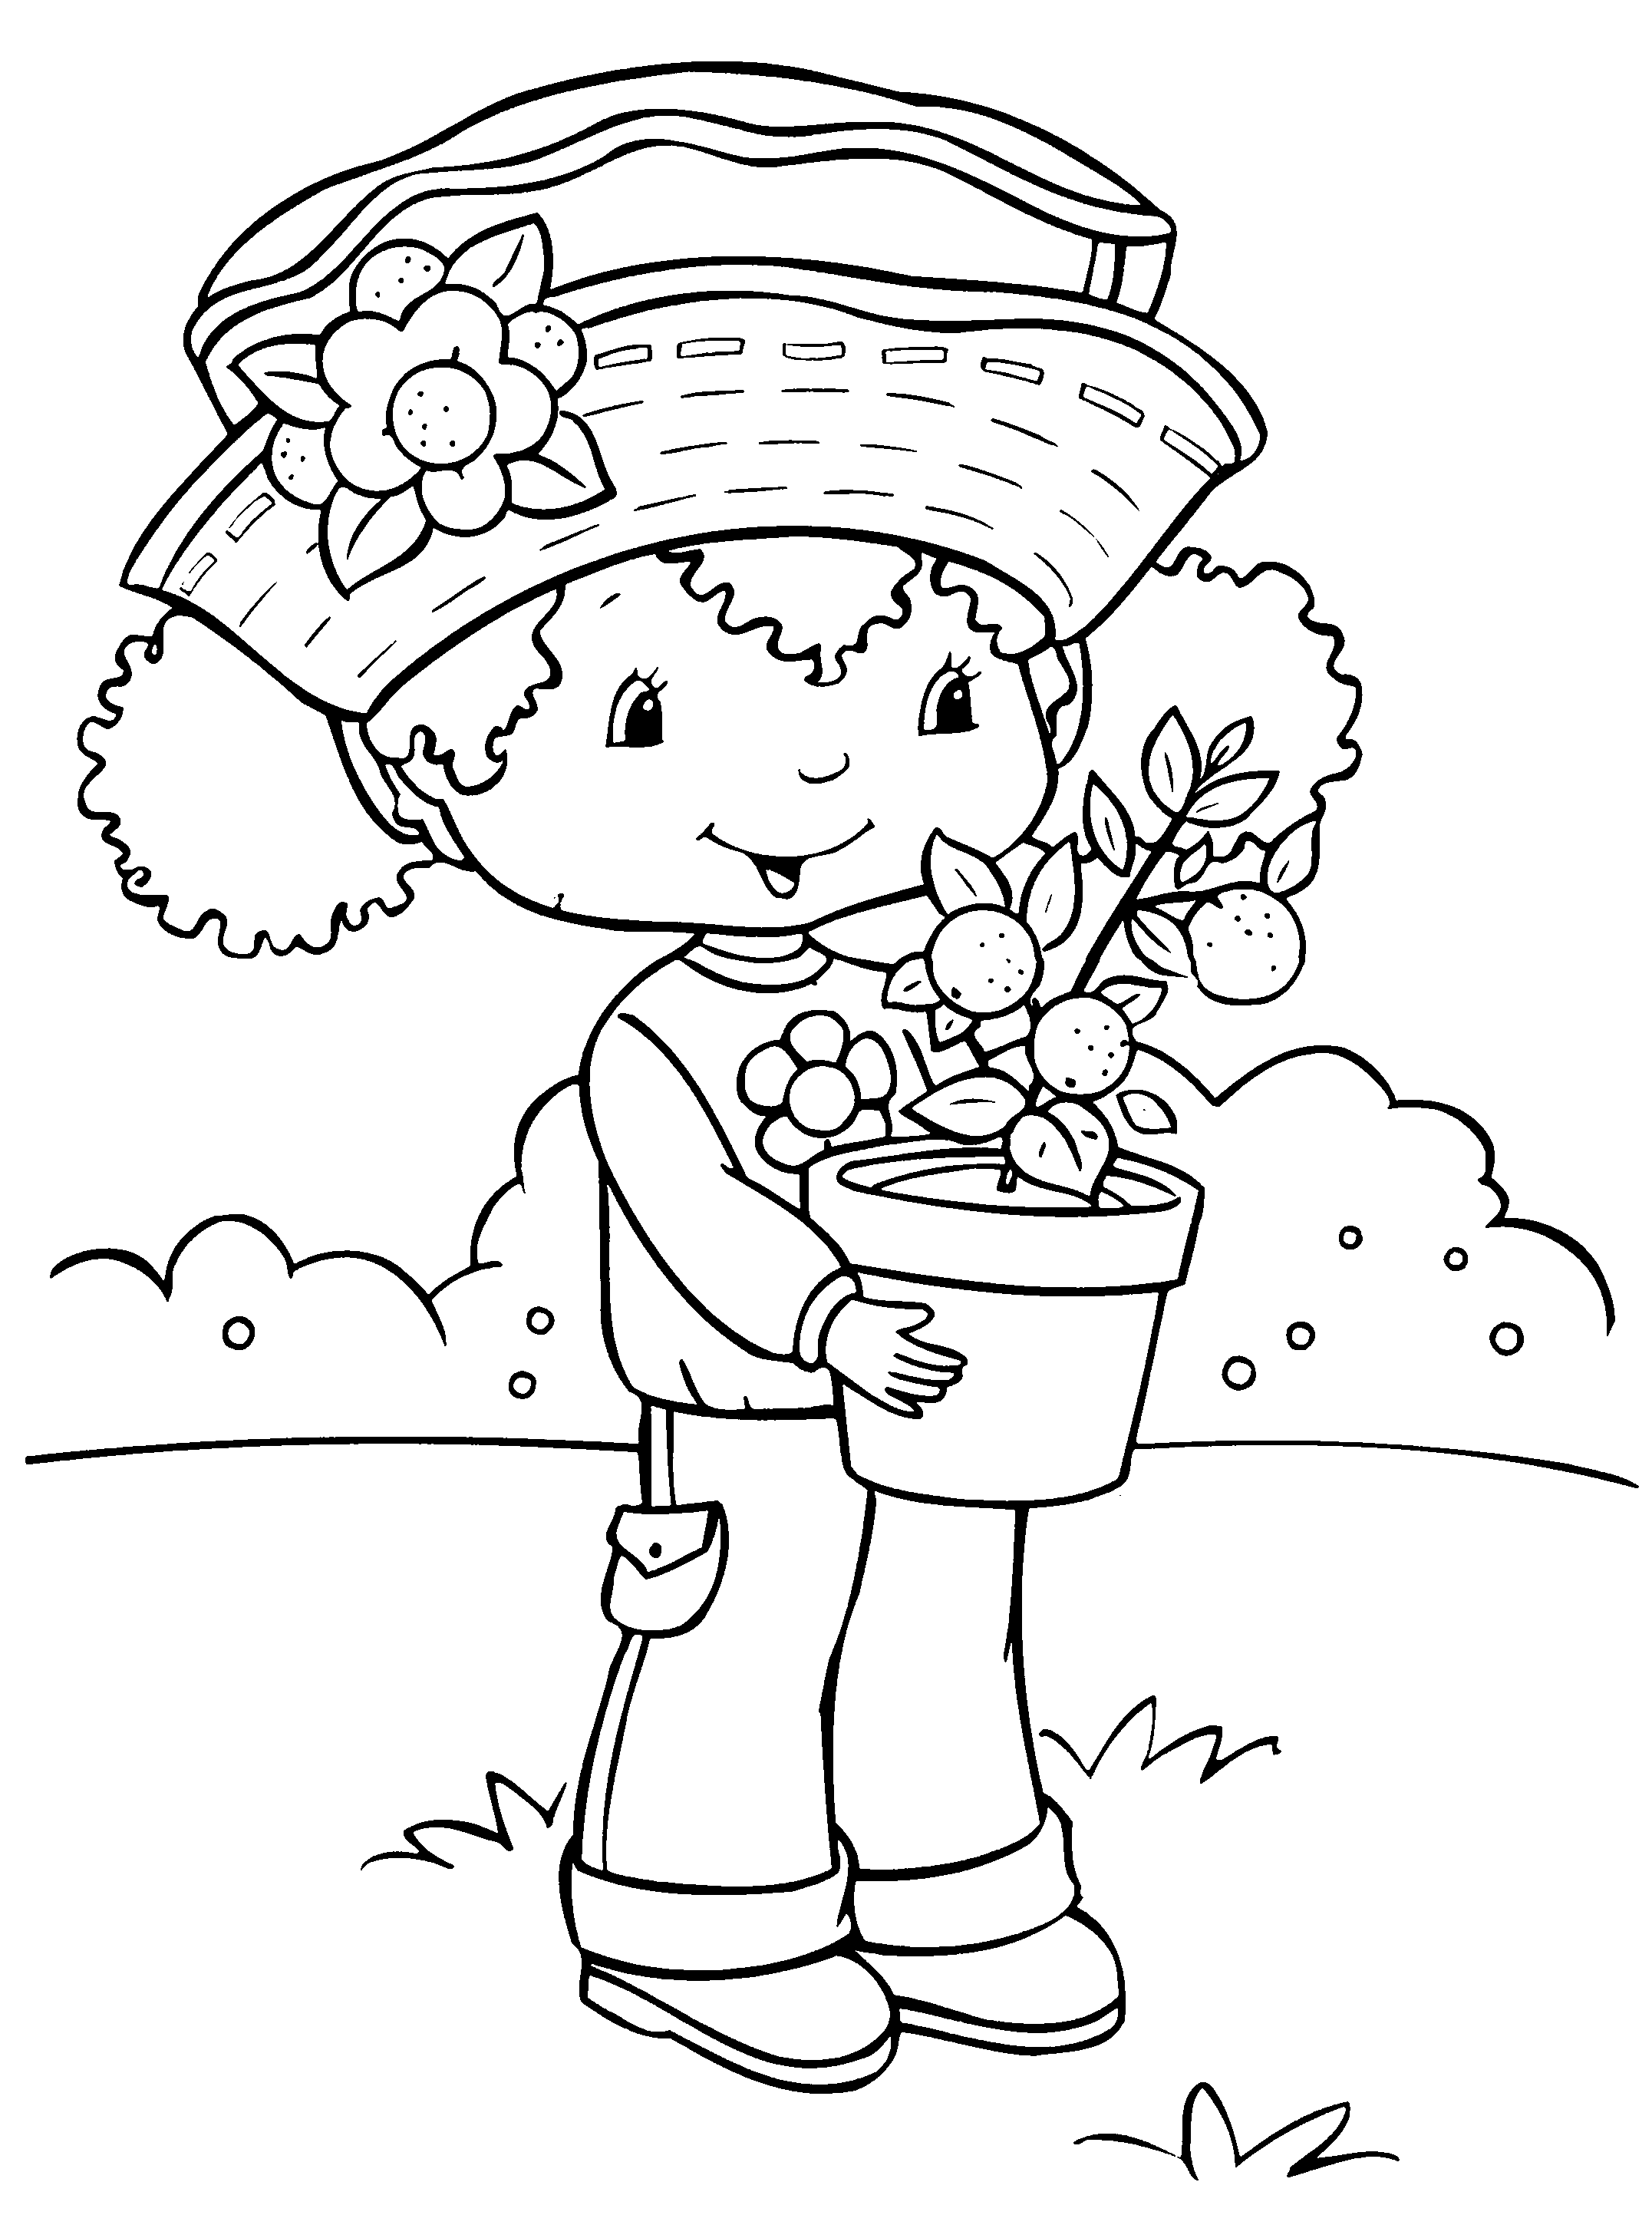  Strawberry Shortcake Coloring Pages / Cool coloring pages / 4